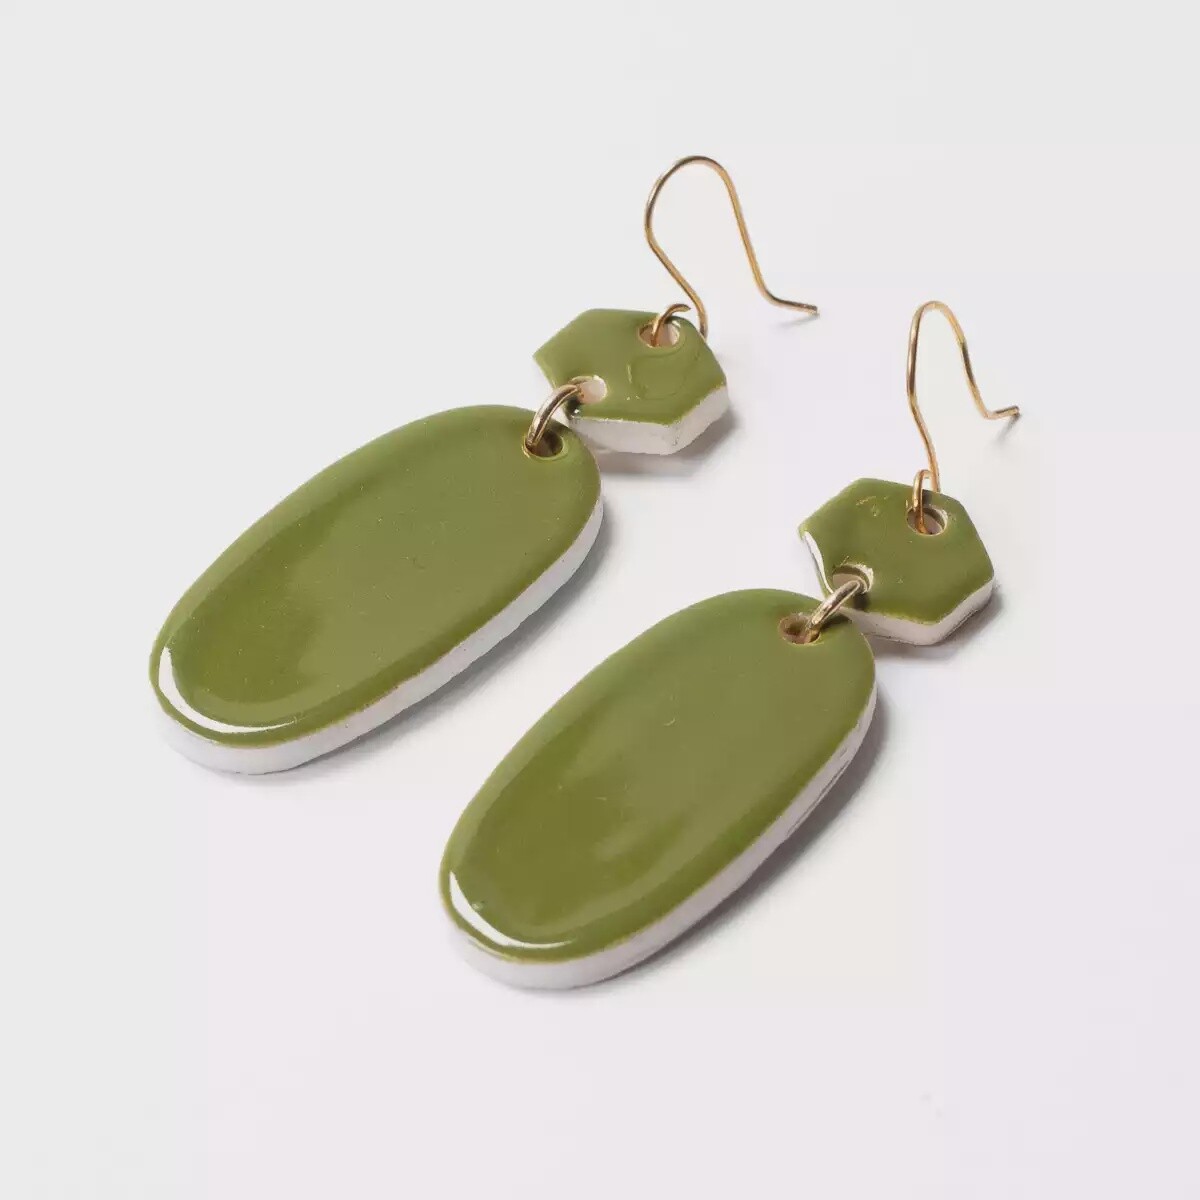 Ceramic Oval Drop Earrings - Olive Green by Clay Blanca